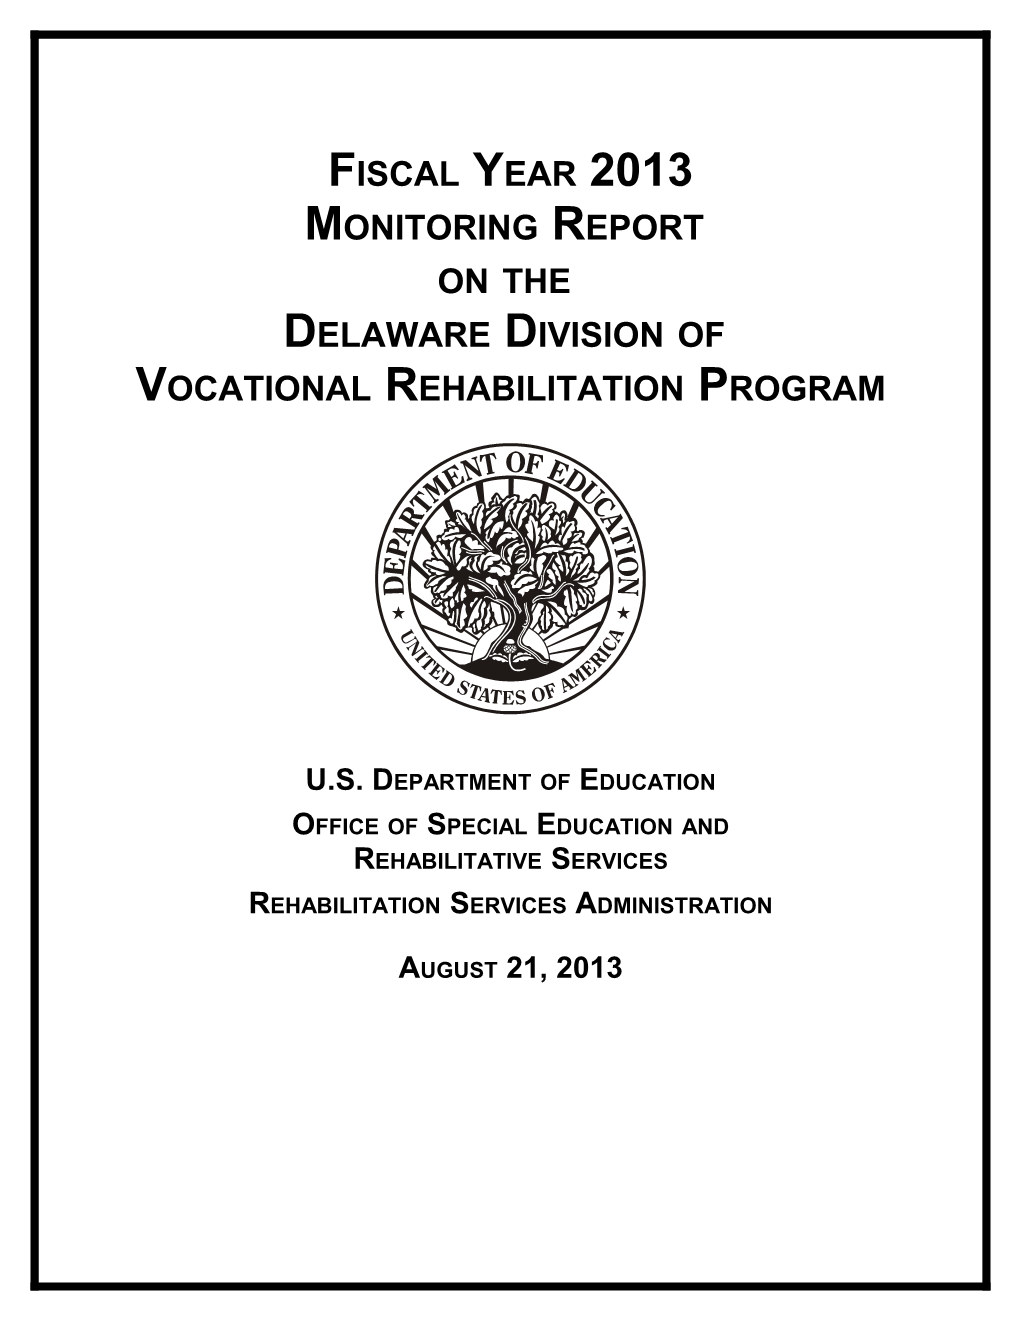 Fiscal Year 2013 Monitoring Report on the Delaware Division of Vocational Rehabilitation